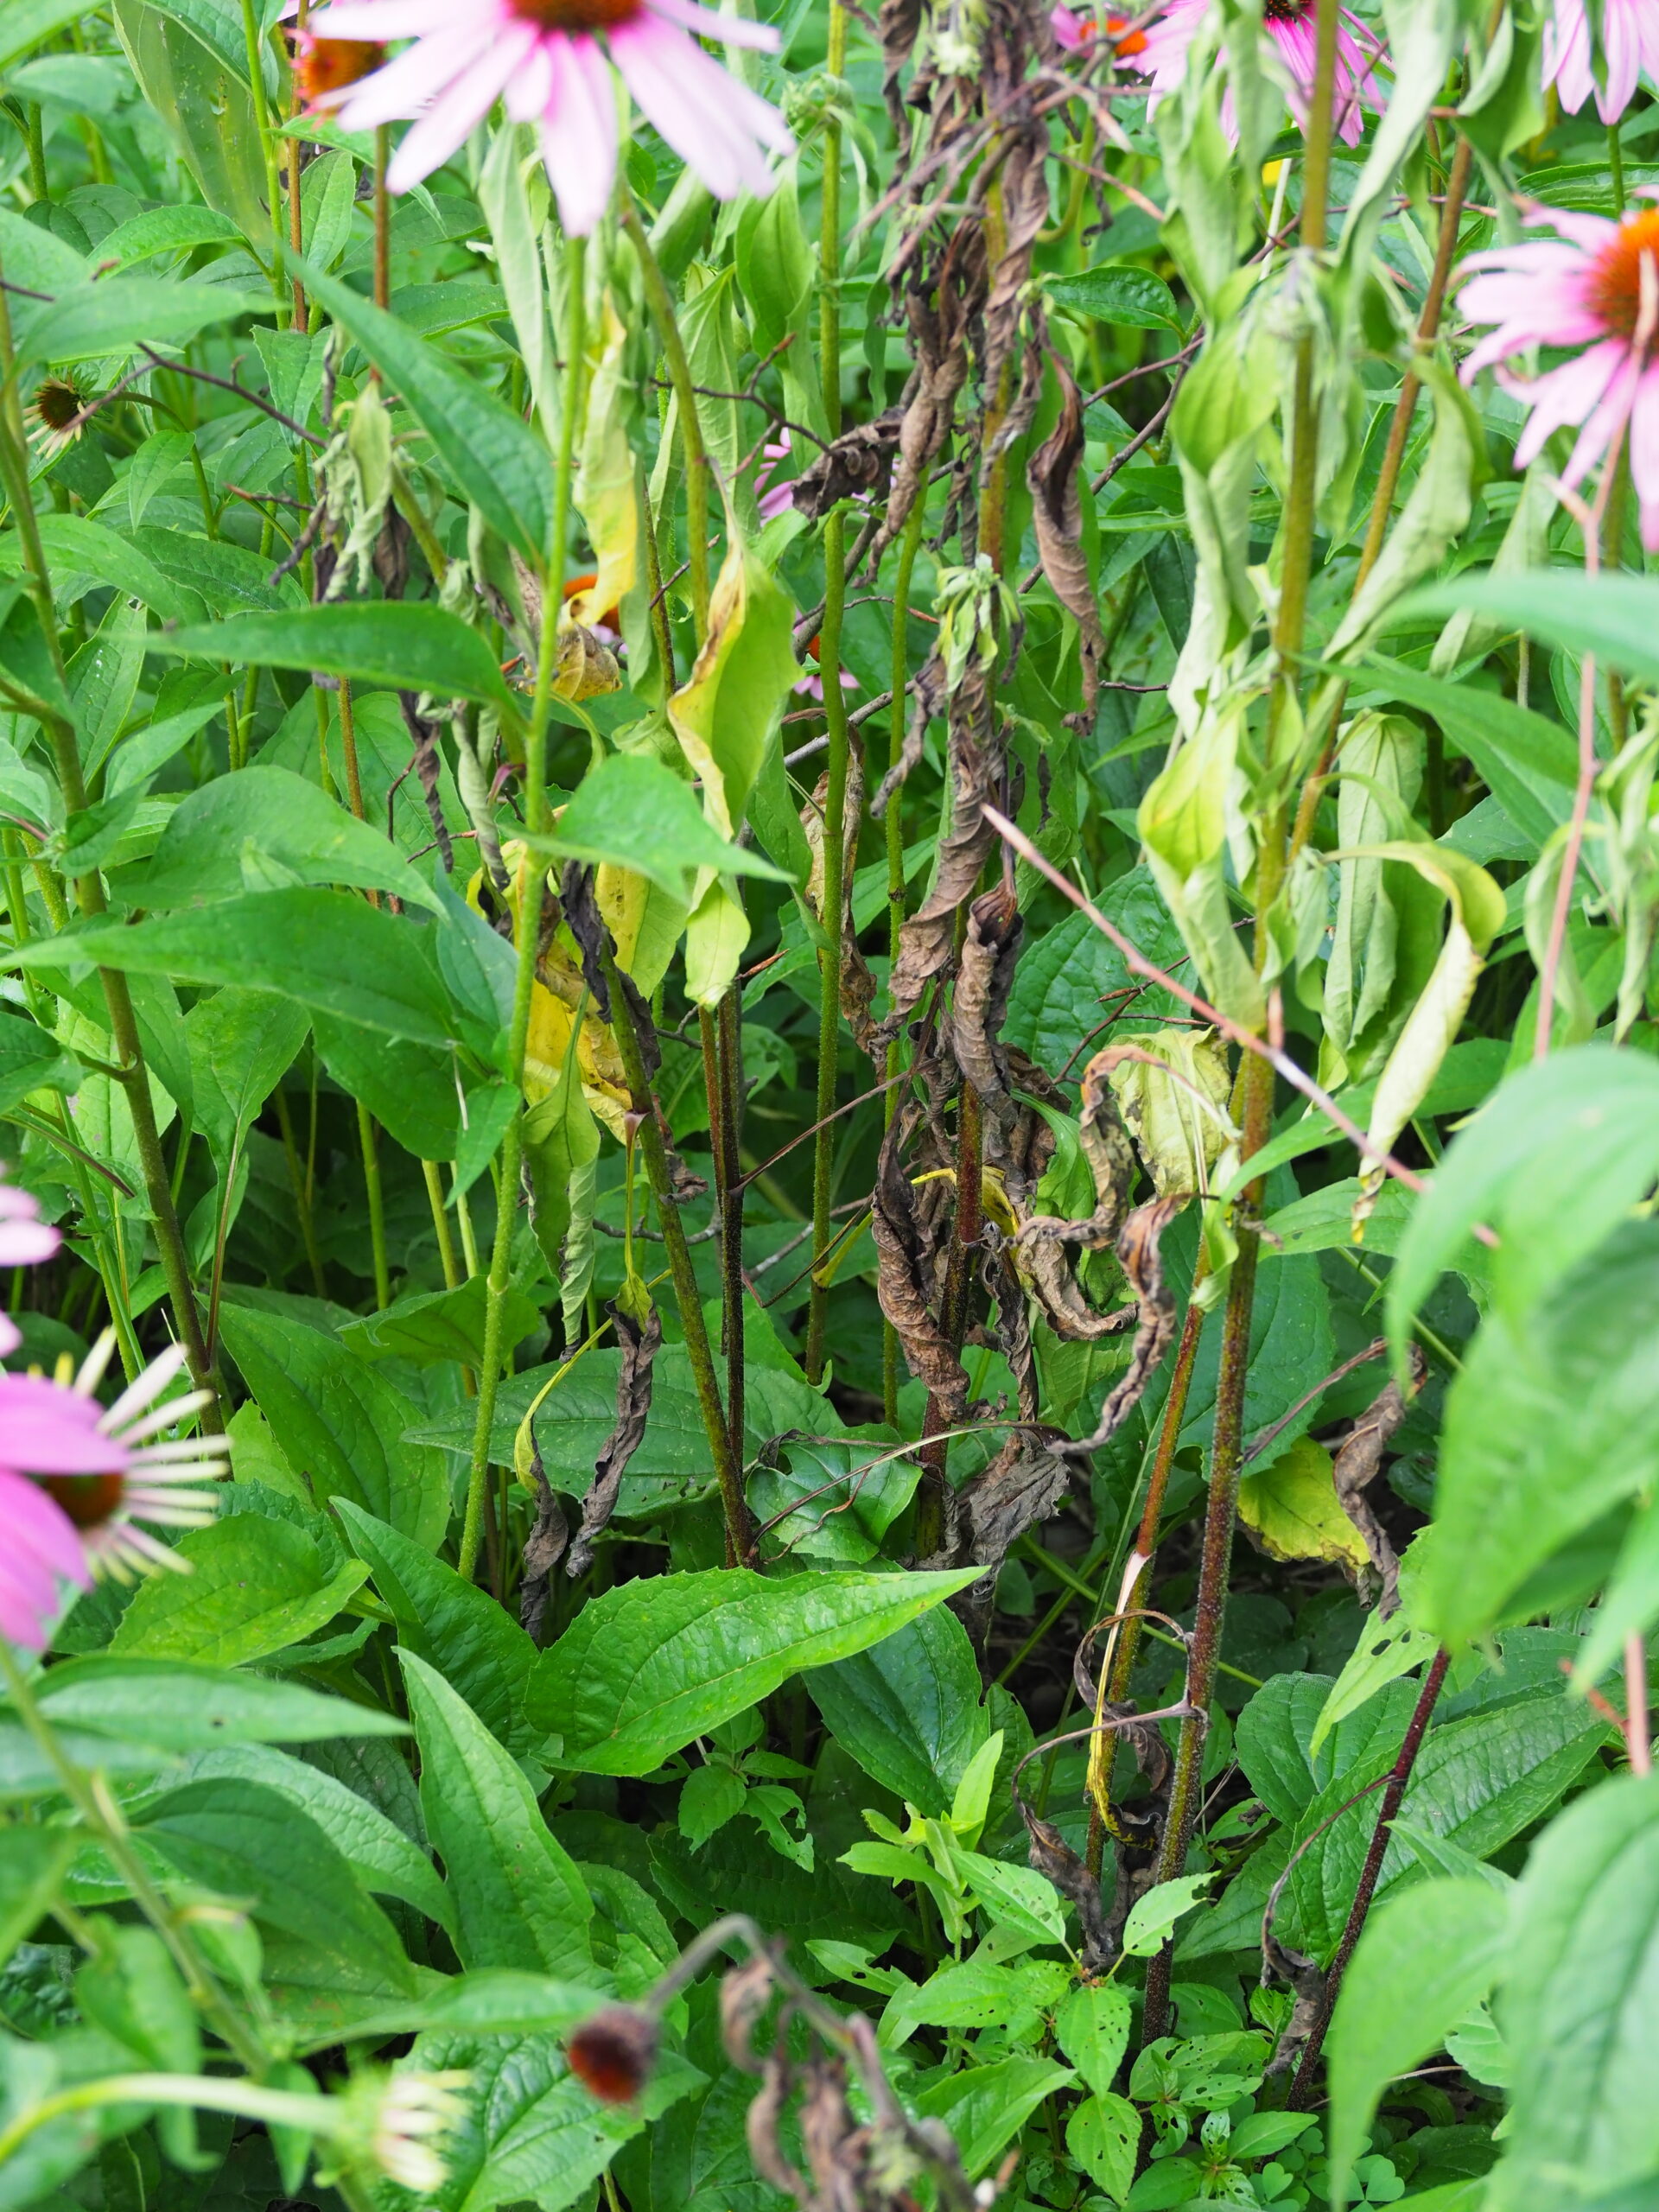 Where the disease was more advanced on a few Echinacea plants the stems were totally browned while surrounding foliage shows the initial sigs of infection.
ANDREW MESSINGER